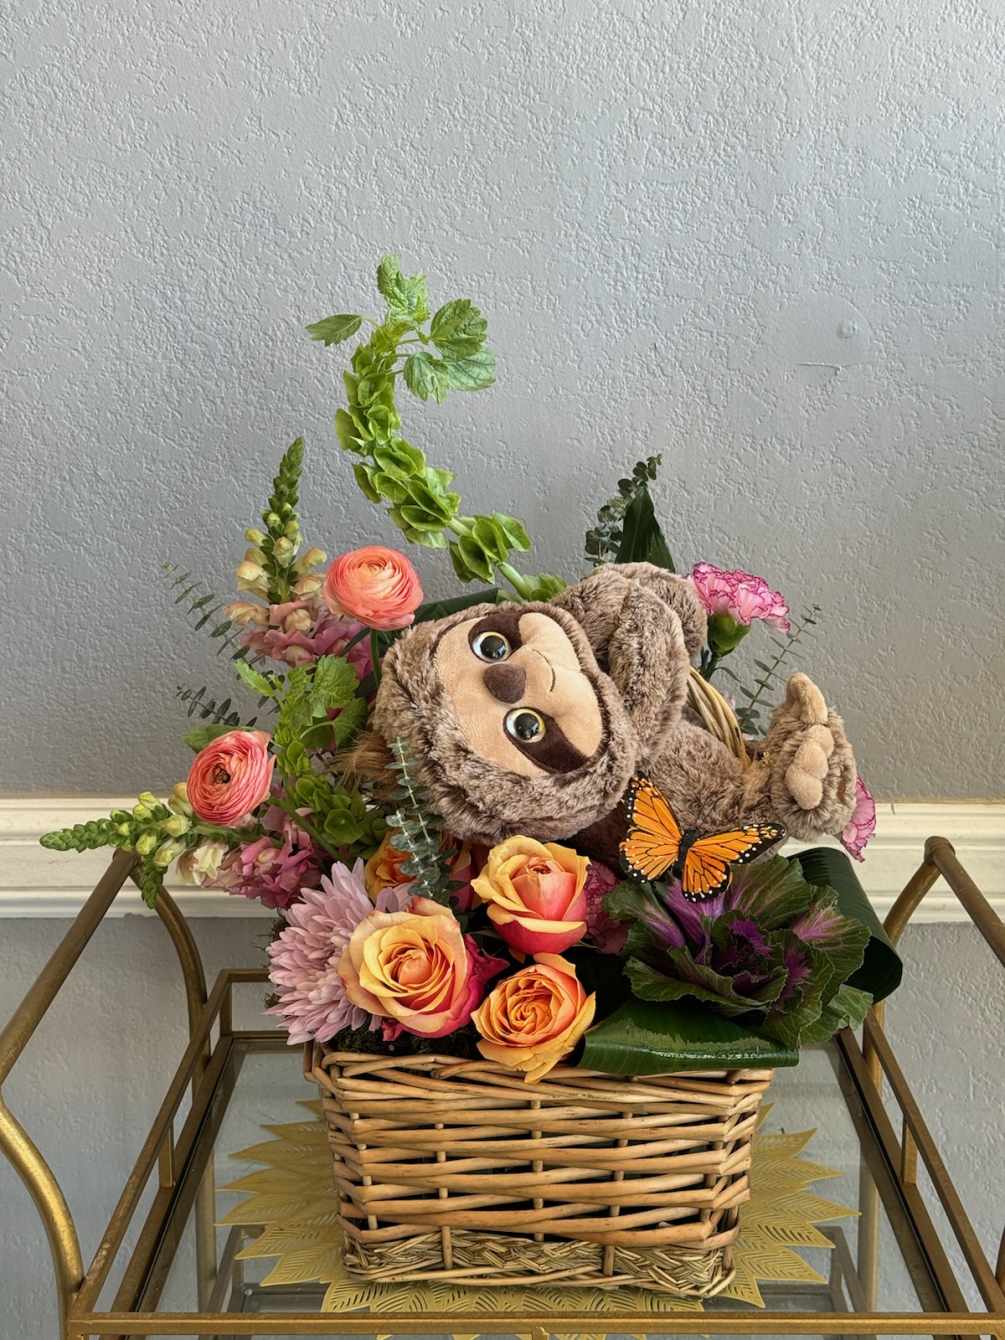 Sloth animal on a basket with beautiful Flowers perfect gift for a